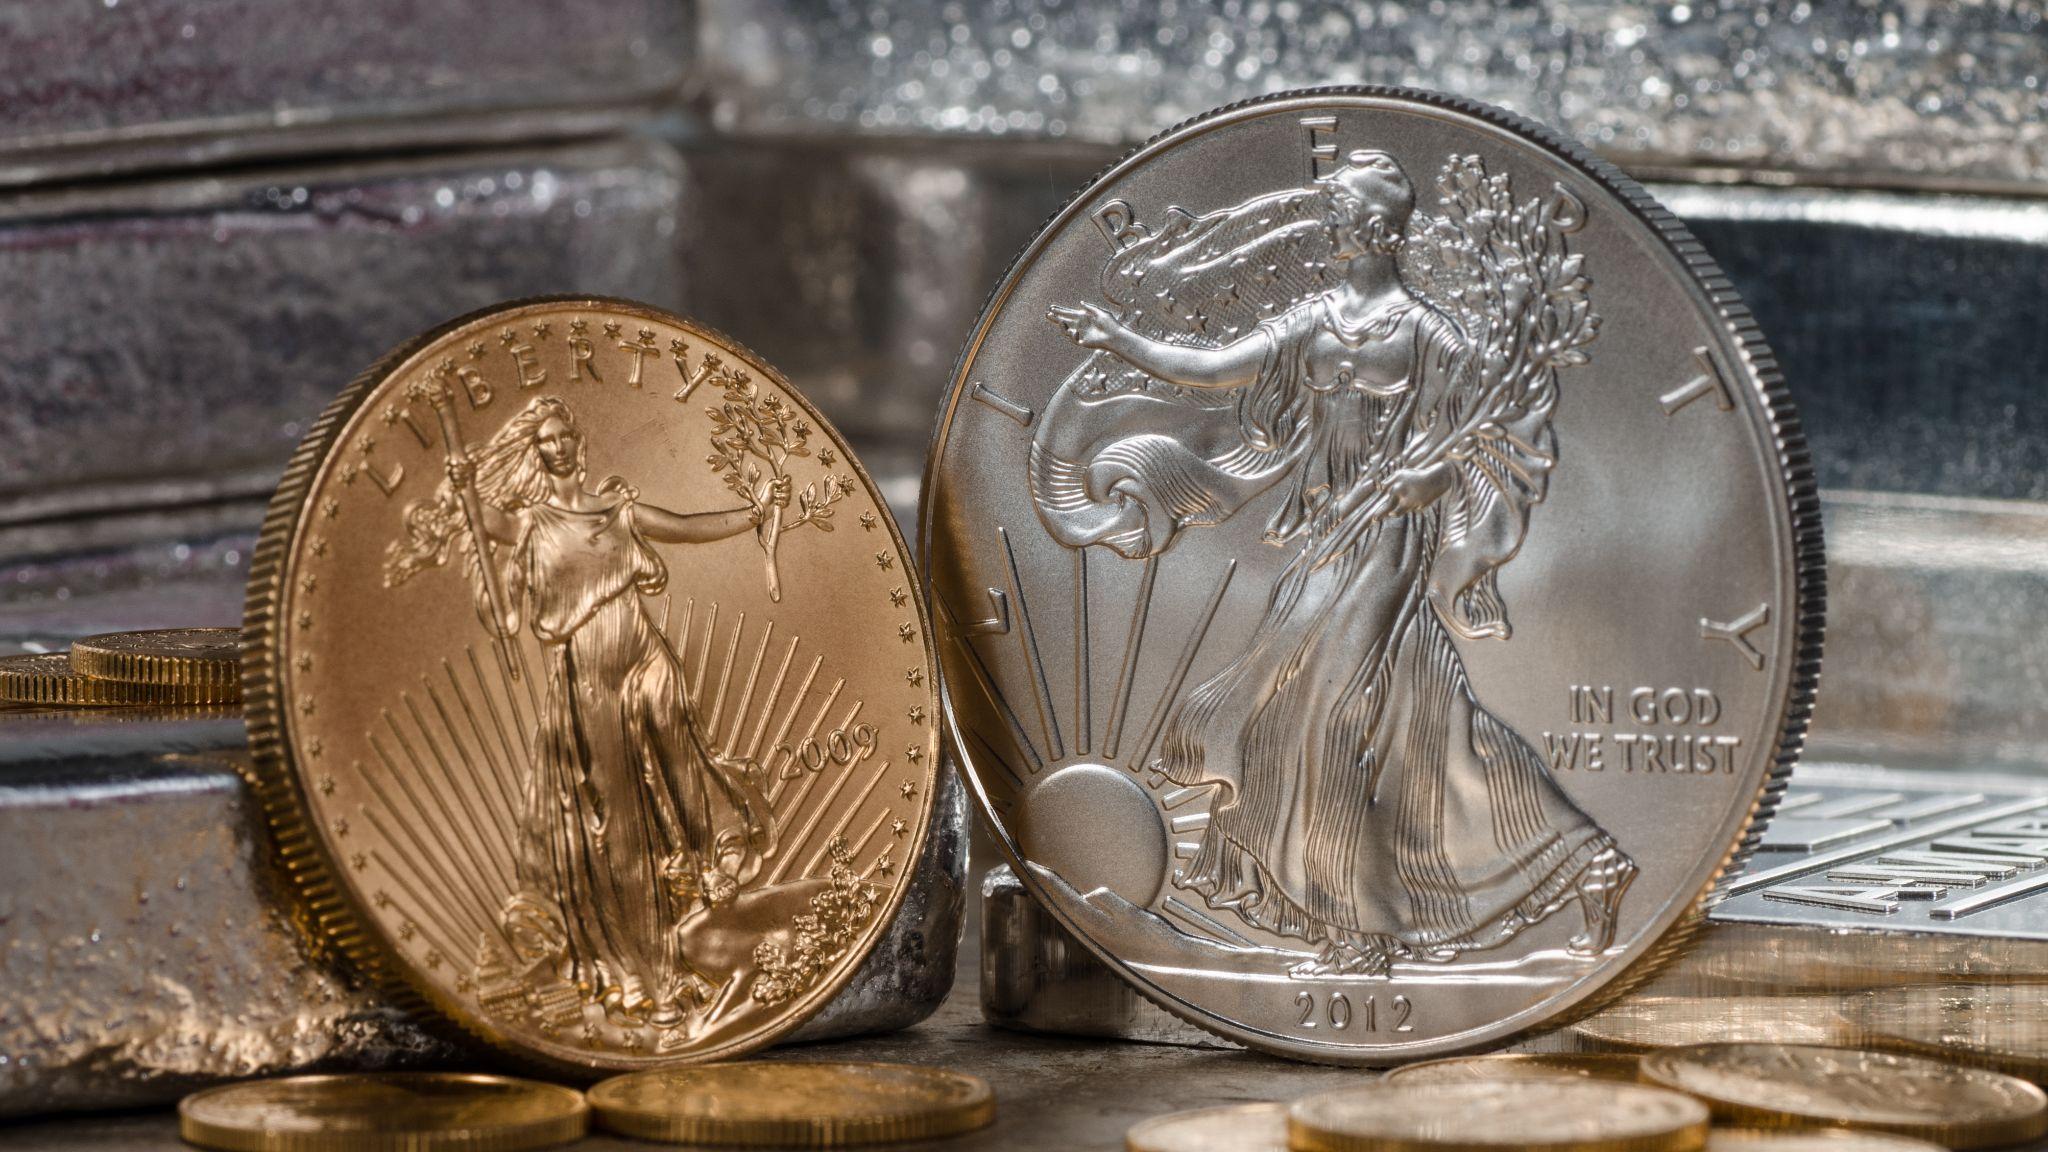 2012 gold and silver liberty coins with other coins in background.